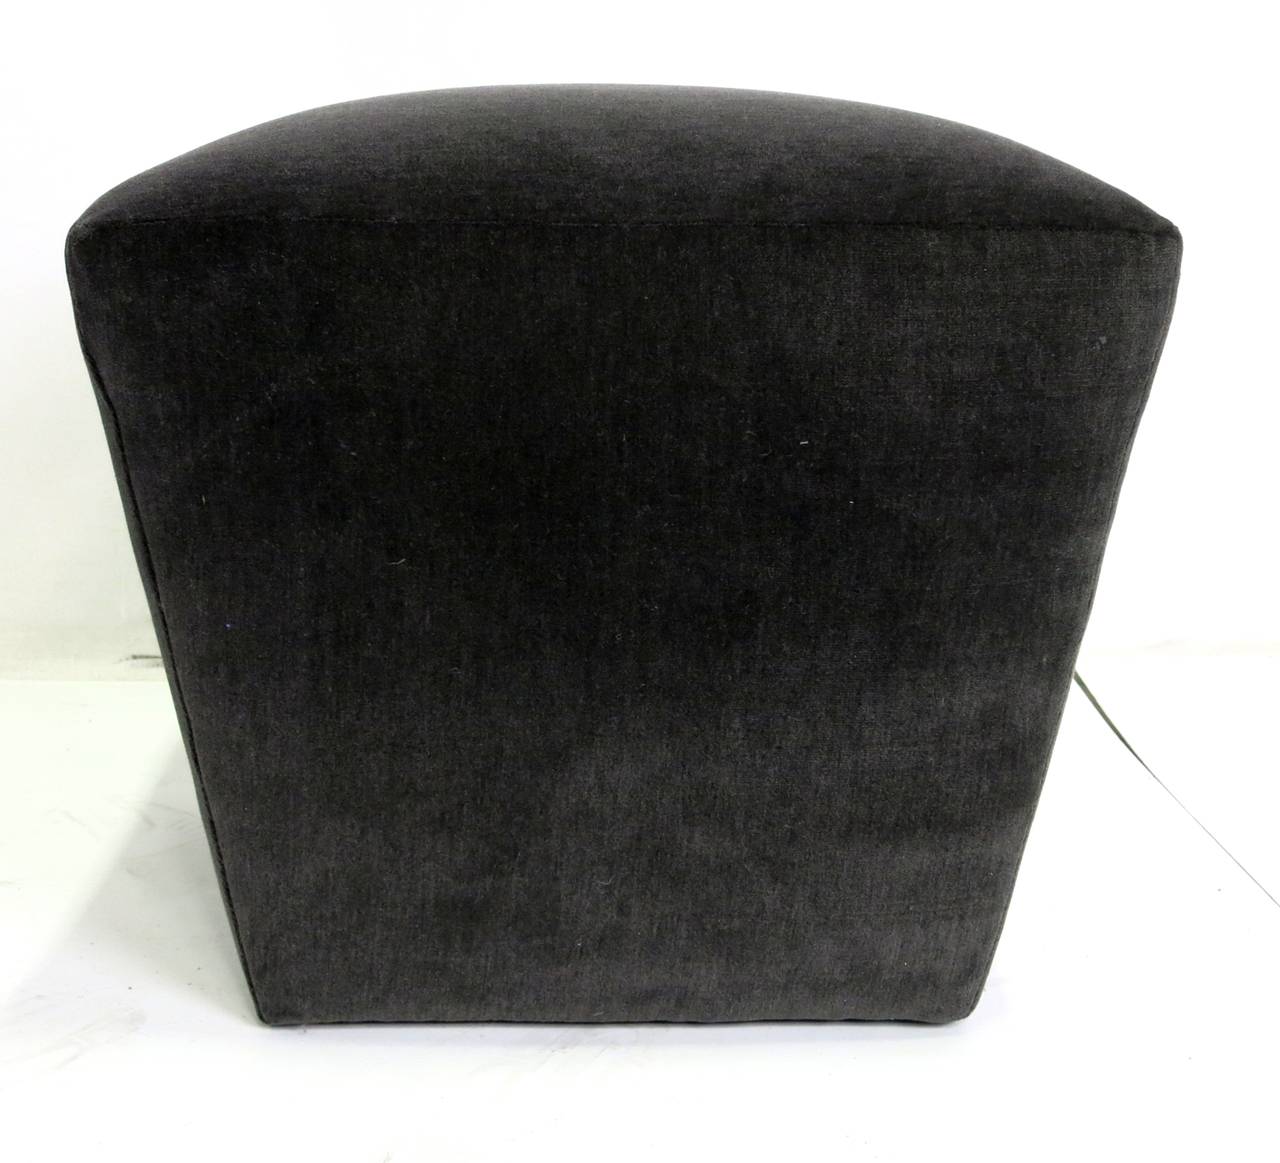 American Pair of Tapered Square Poufs